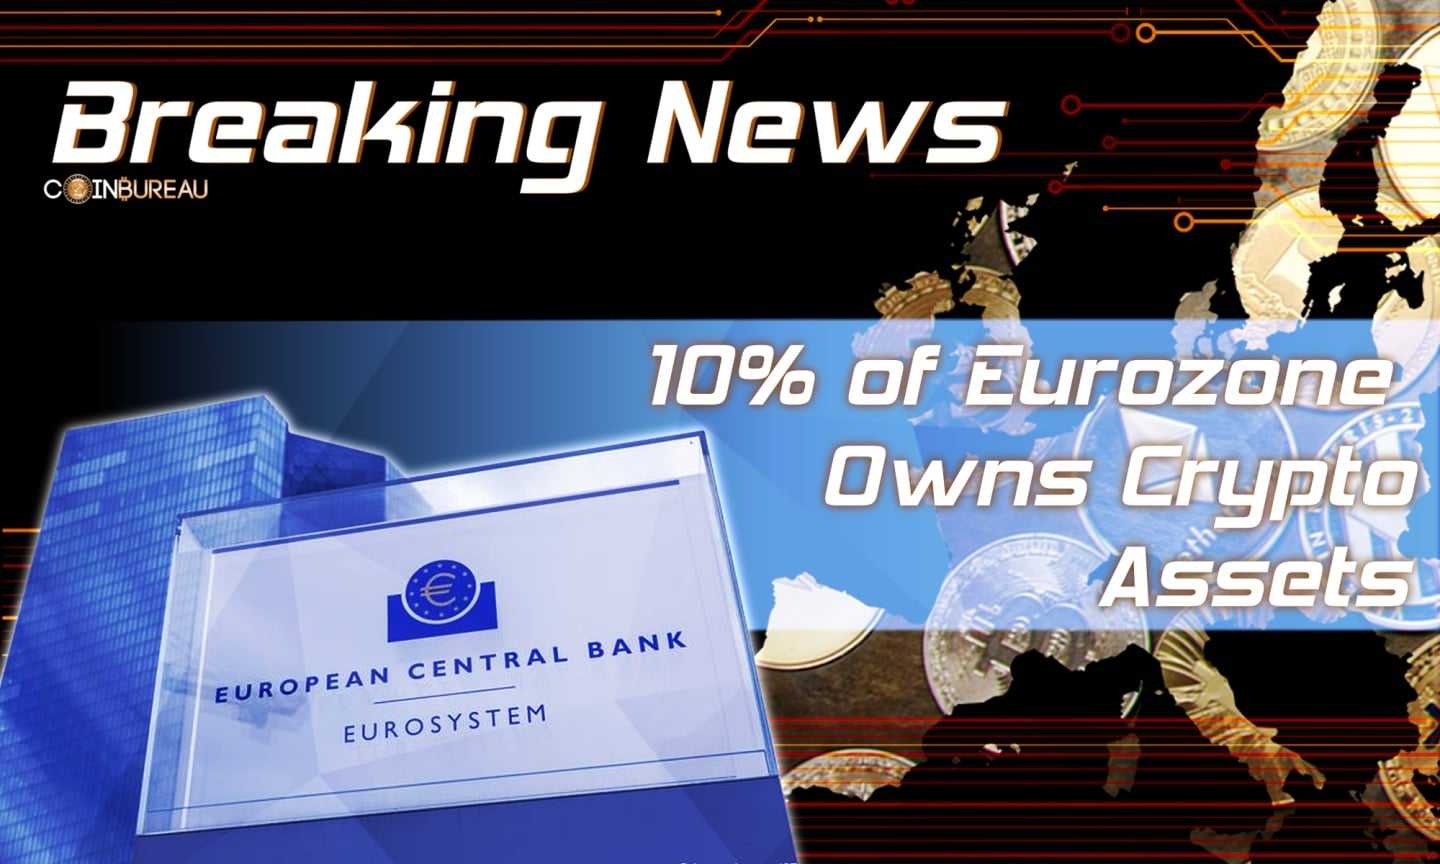 European Central Bank Report Reveals 10 percent of Eurozone Owns Crypto Assets